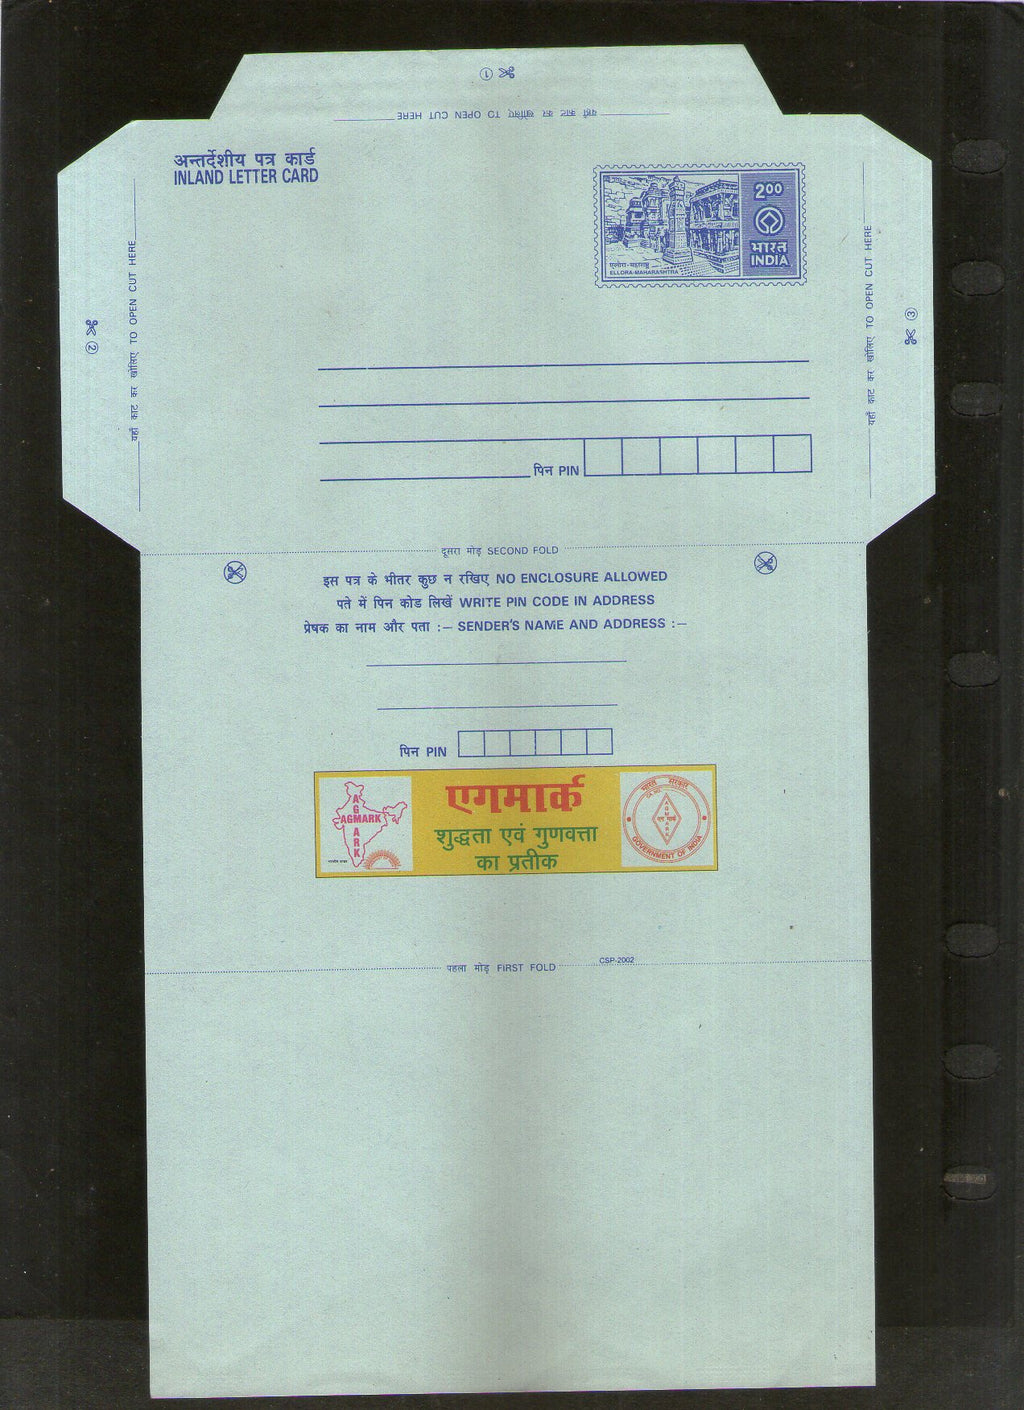 India 2002 2Rs Ellora Cave Inland Letter Card with AGMARK Advertisement ILC MINT # 690